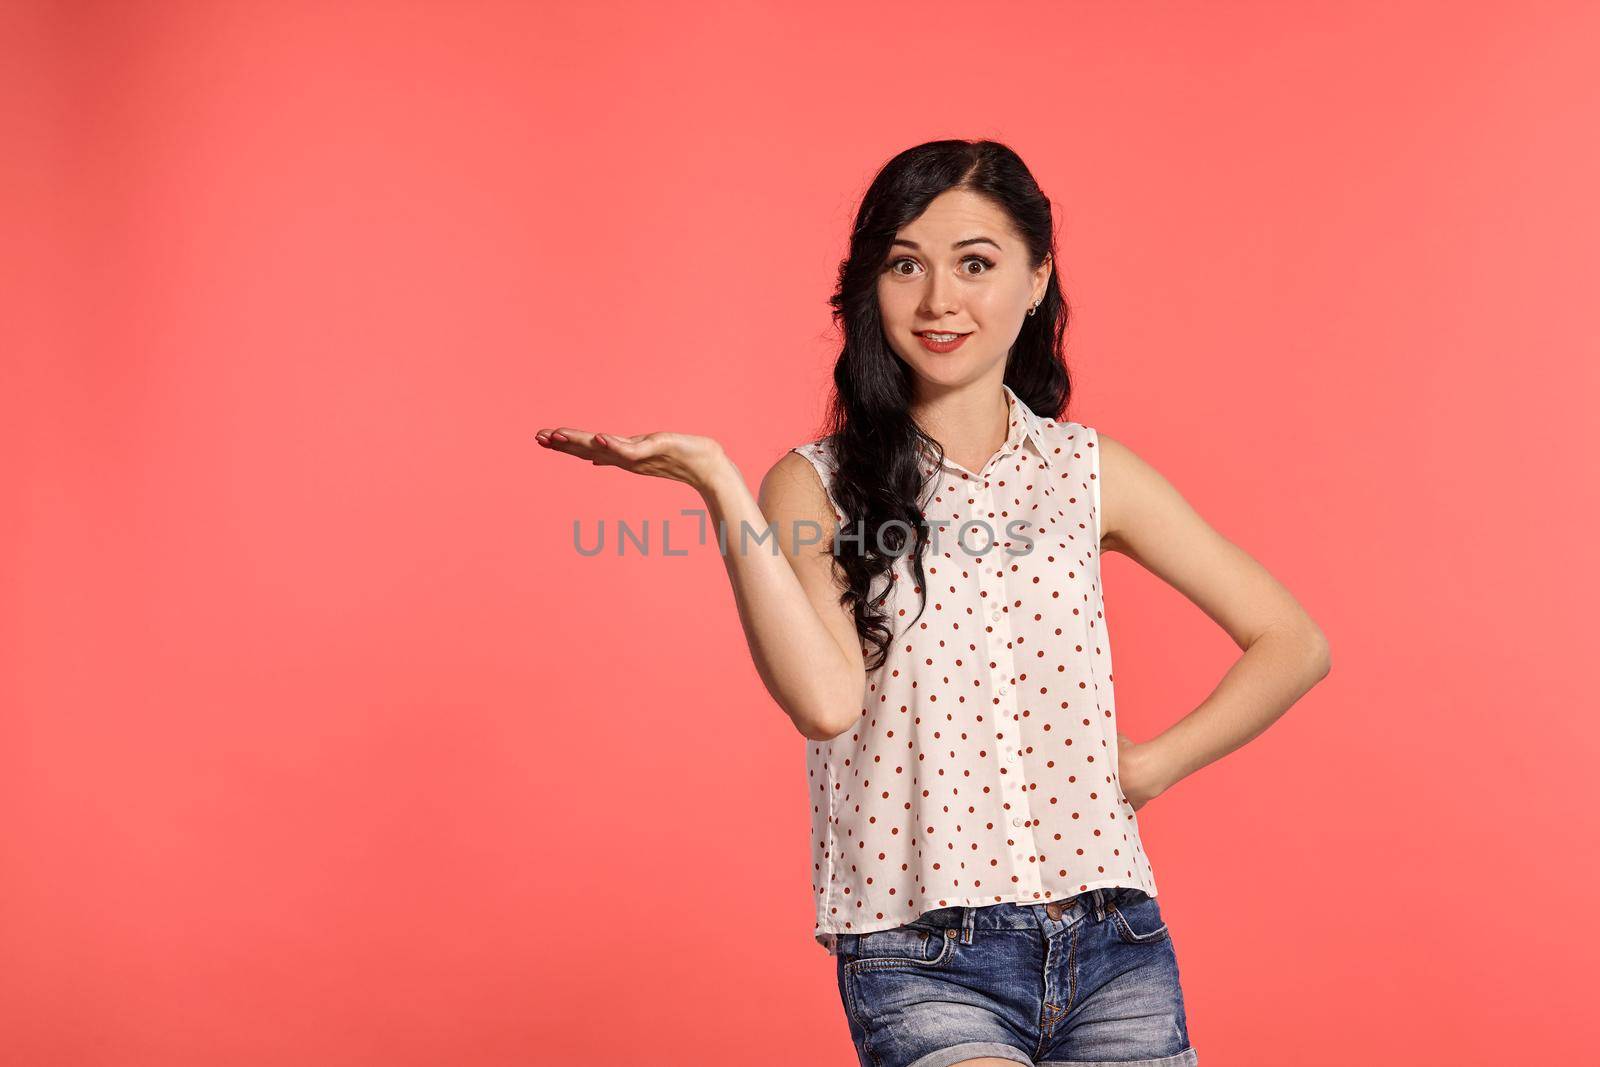 Close-up studio shot of a nice teen lady, wearing casual white polka dot blouse and denim short shorts. Little brunette female acting like holding something in her hand, posing over a pink background. People and sincere emotions.